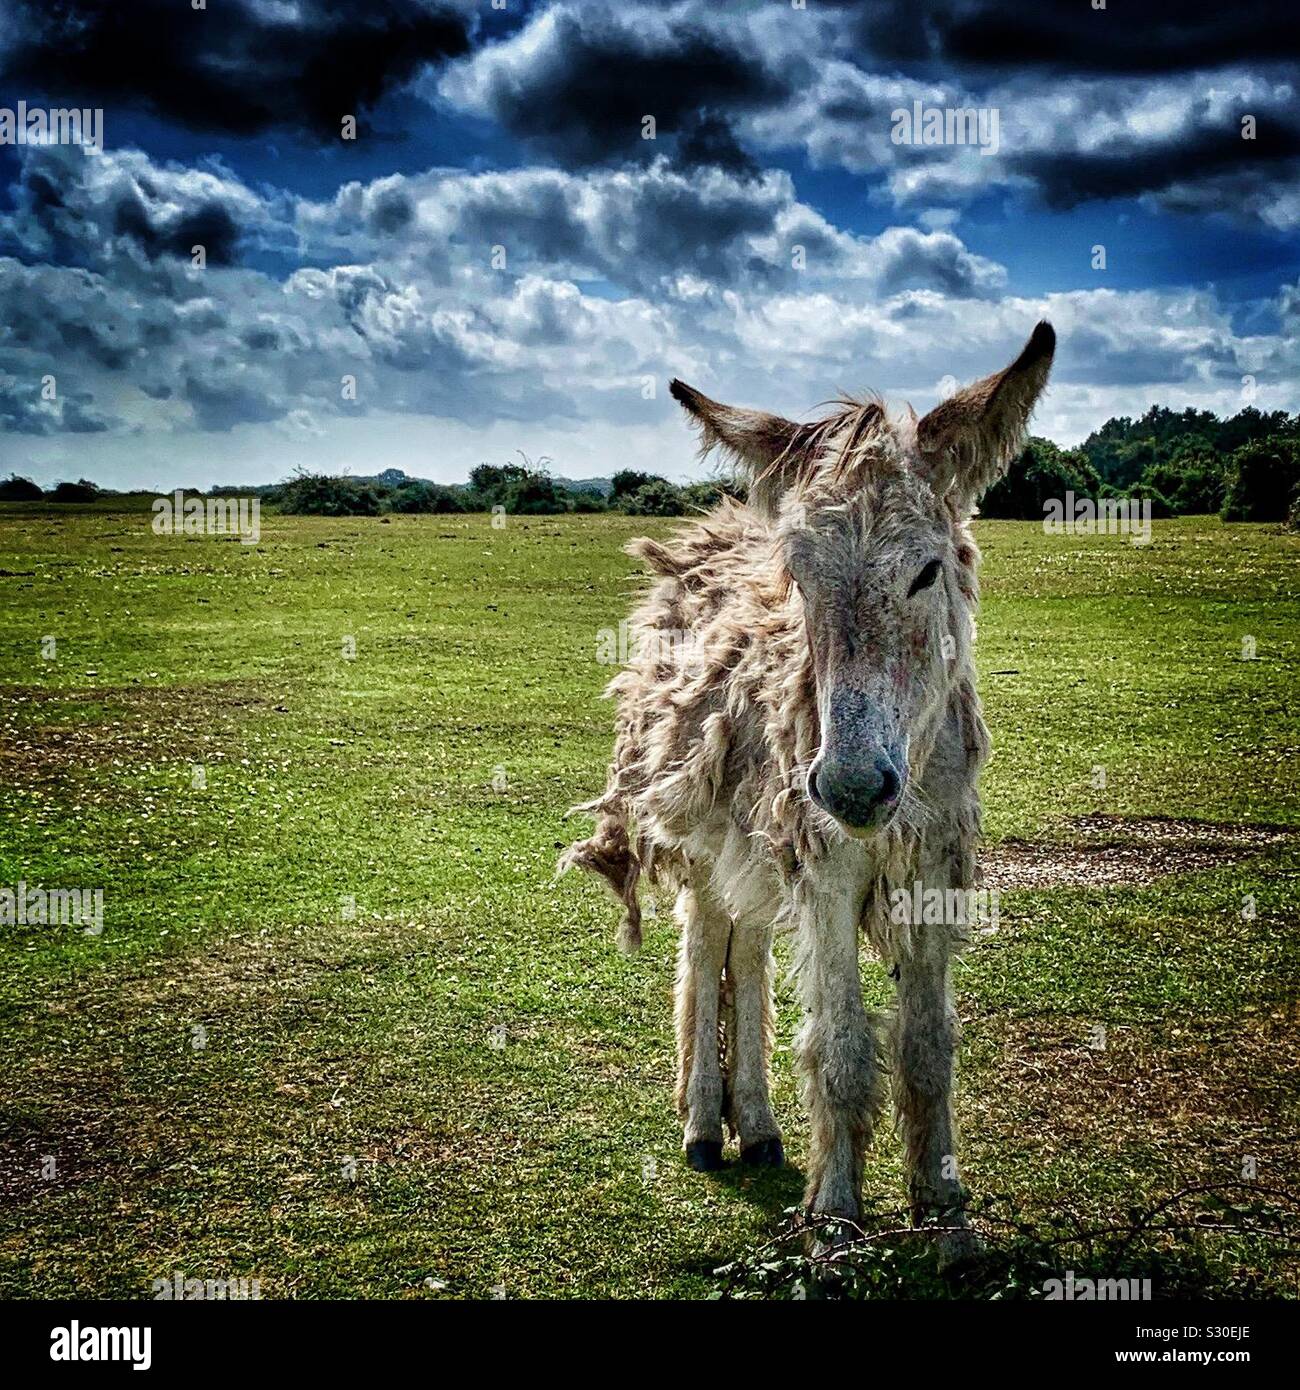 Moulting donkey standing in field bad hair day Stock Photo